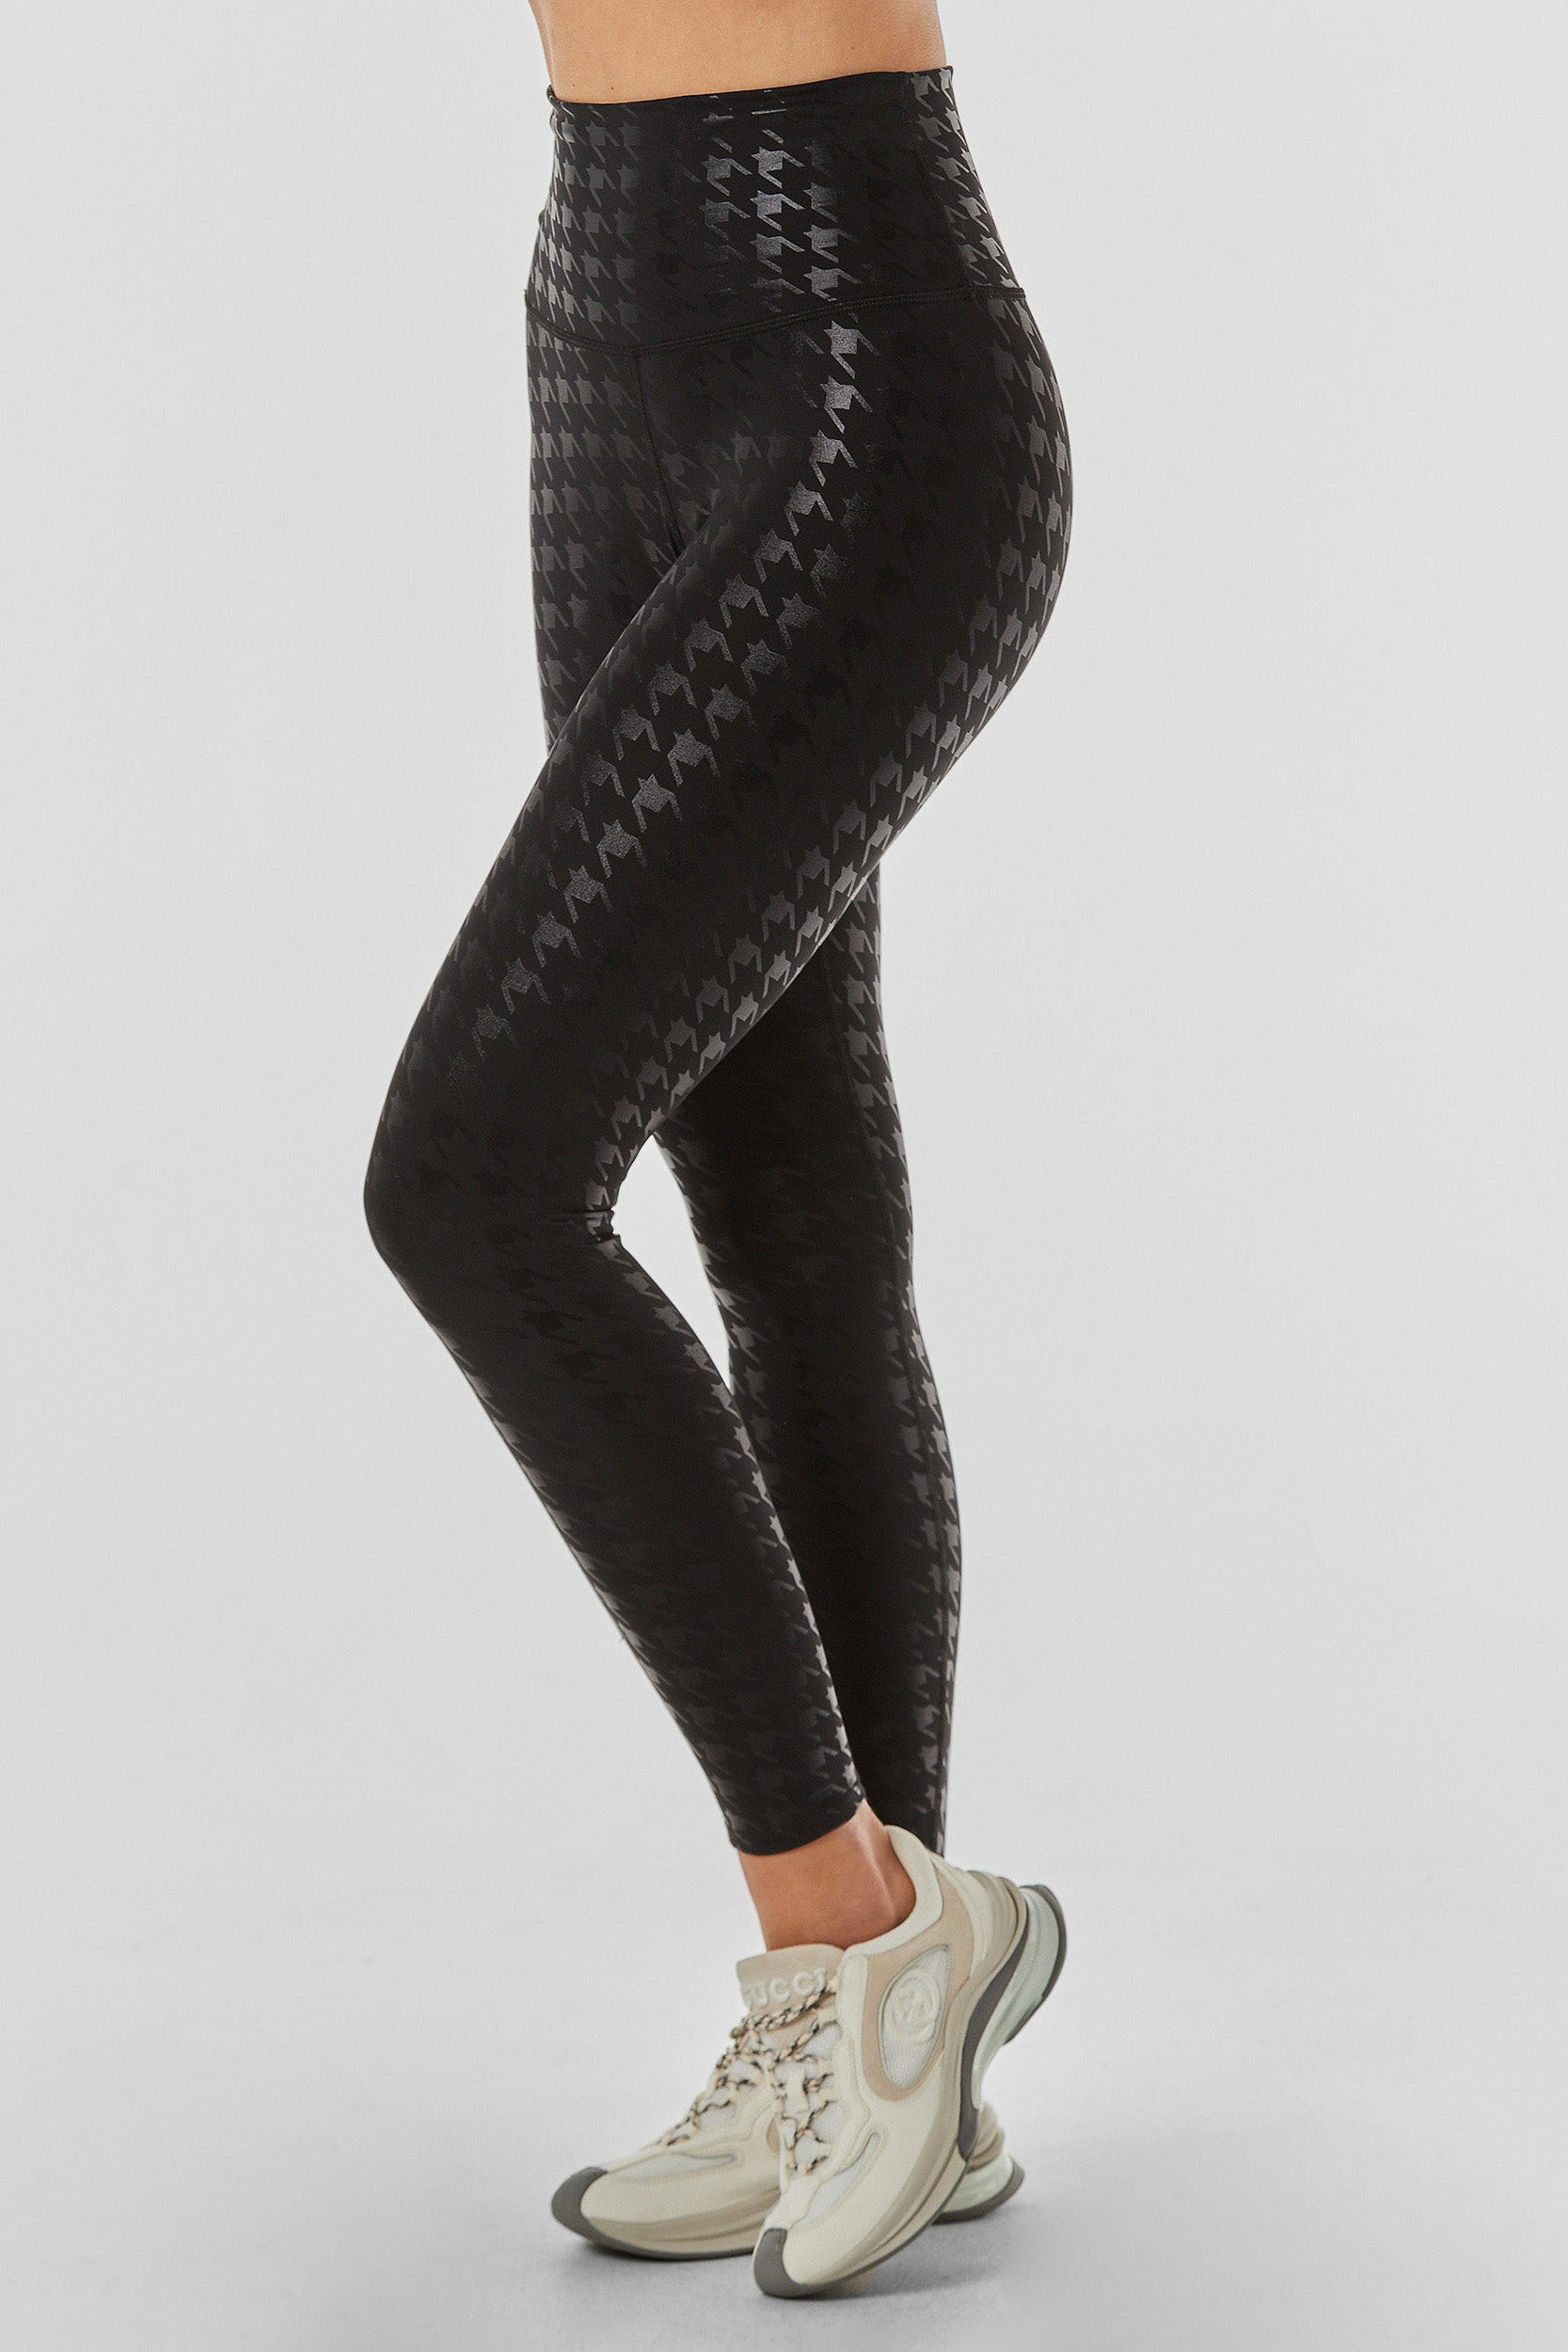 A person is wearing the Houndstooth High-Waisted Legging - Black, crafted from supportive performance fabric. The black leggings showcase a glossy houndstooth pattern and include a four-way stretch waistband. They are paired with white sneakers featuring light green and grey accents. The plain white background highlights only their lower body.